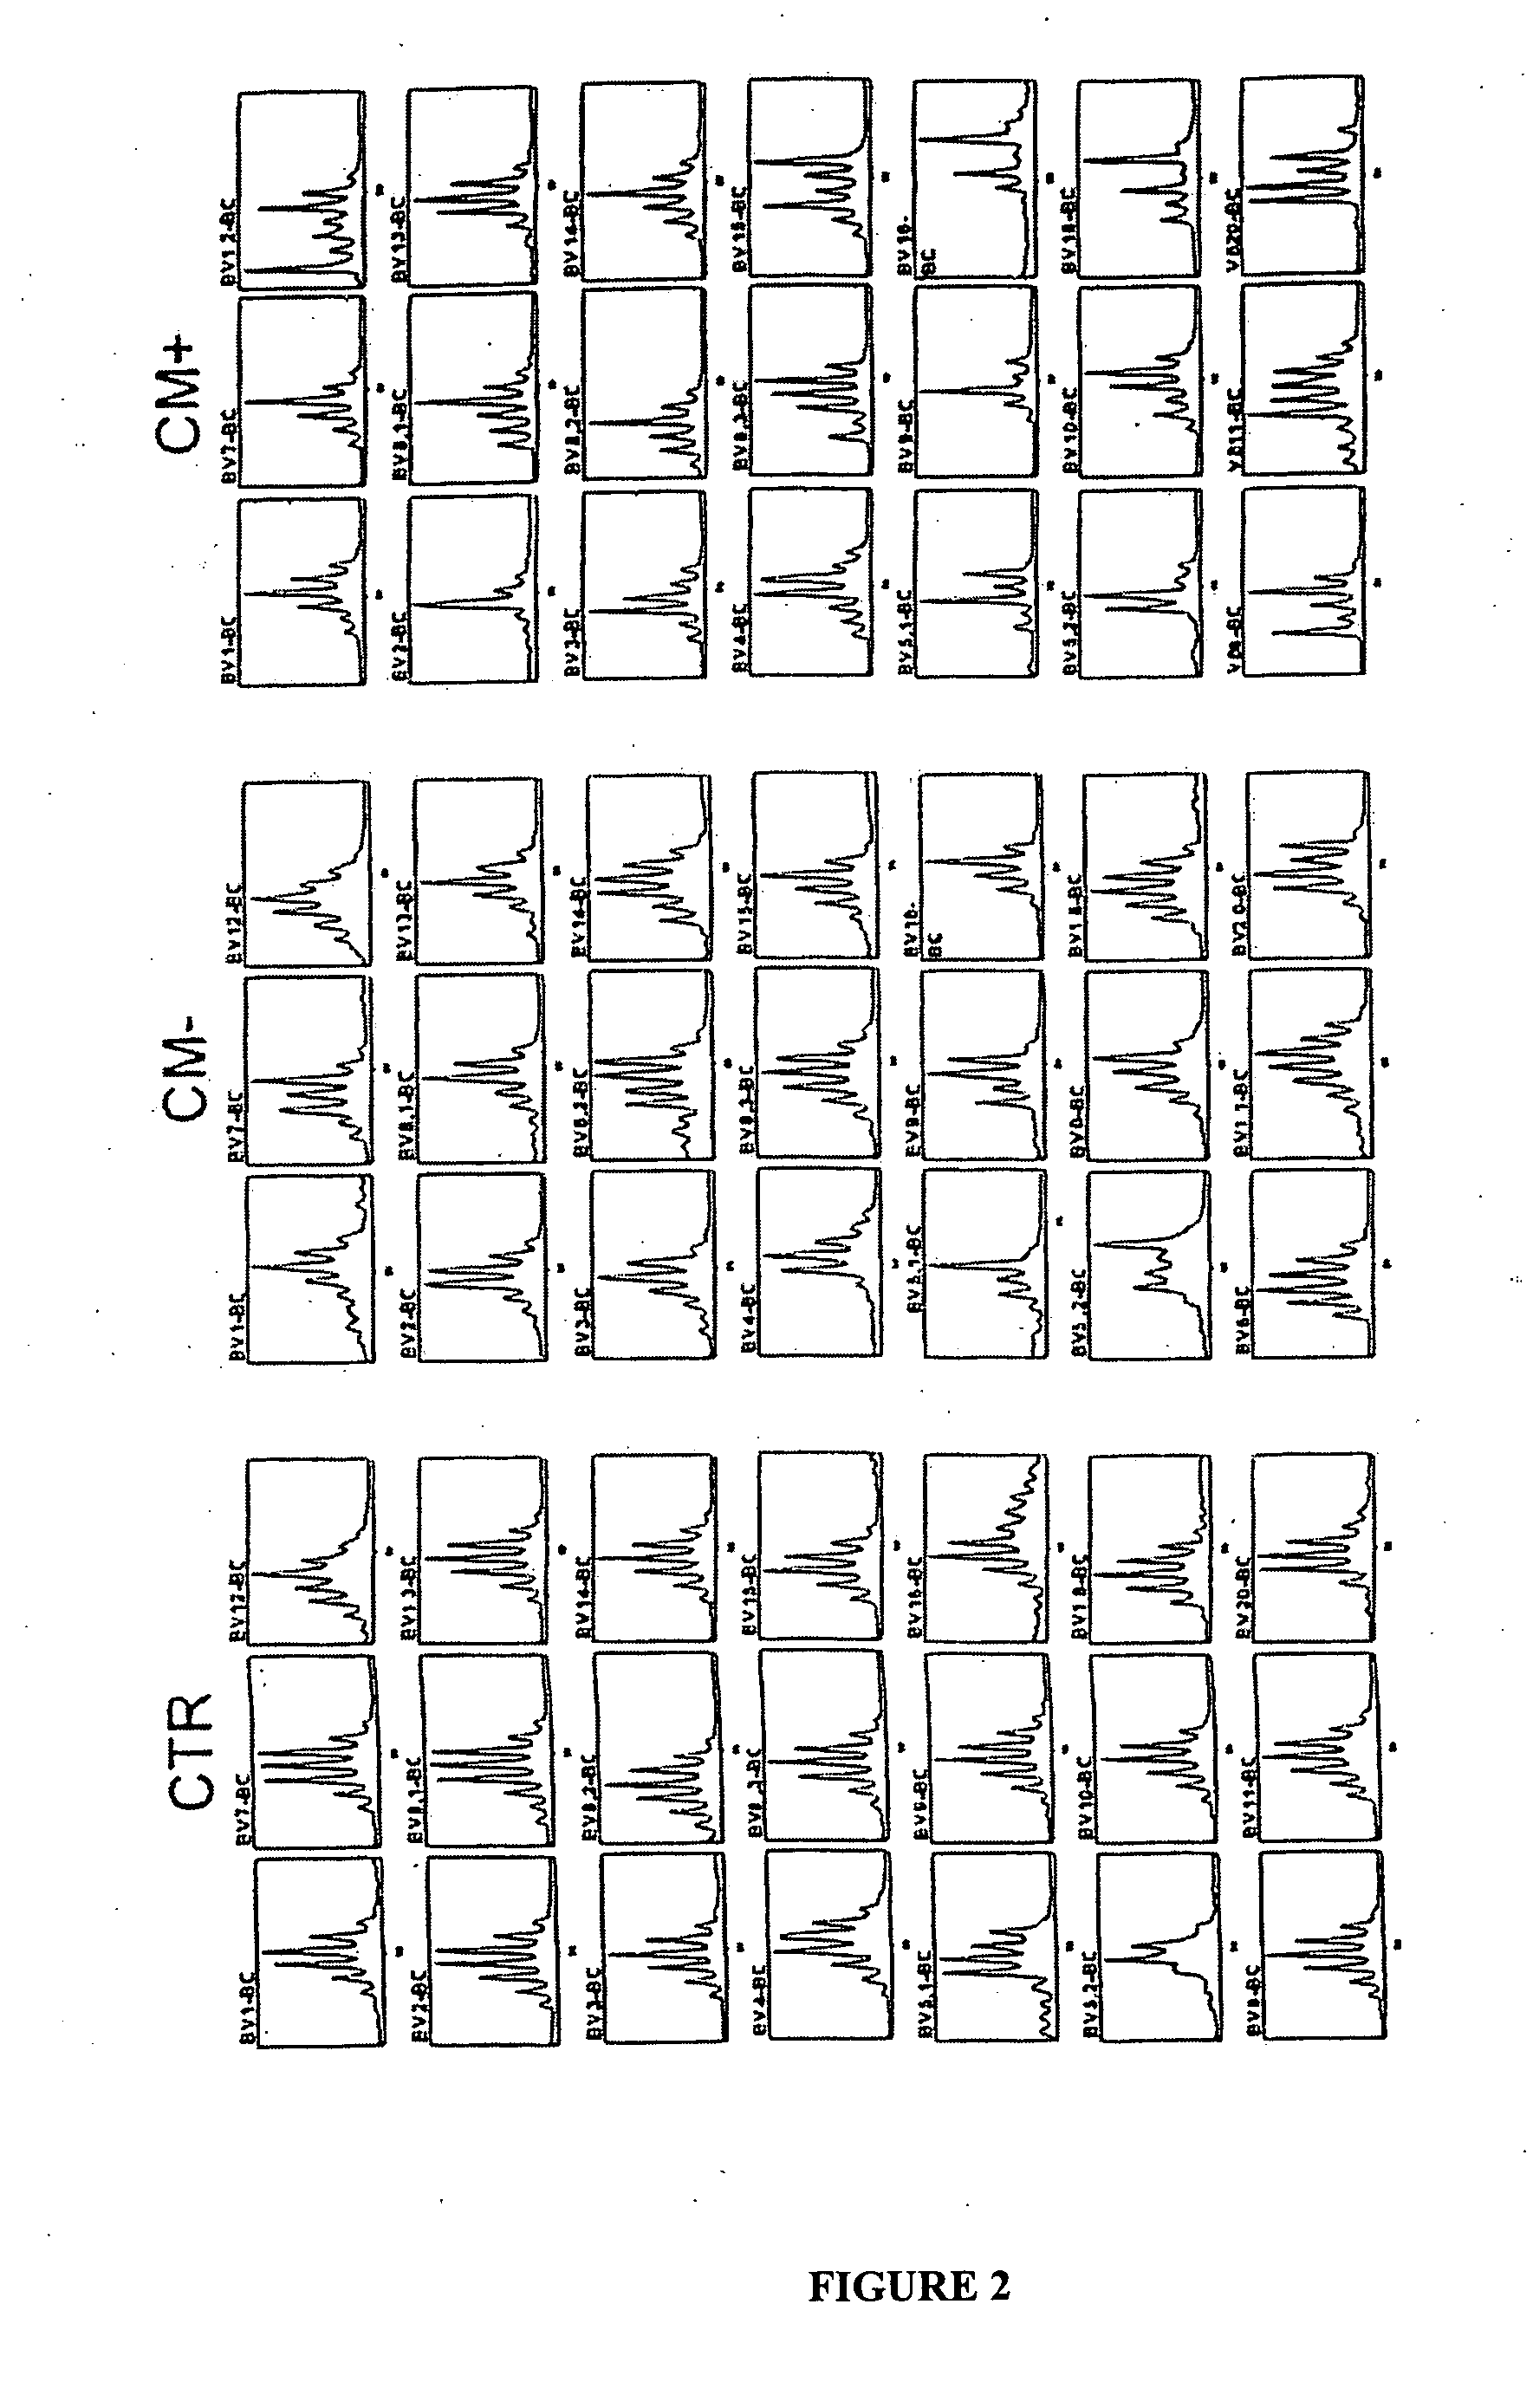 System, method, device, and computer program product for extraction, gathering, manipulation, and analysis of peak data from an automated sequencer